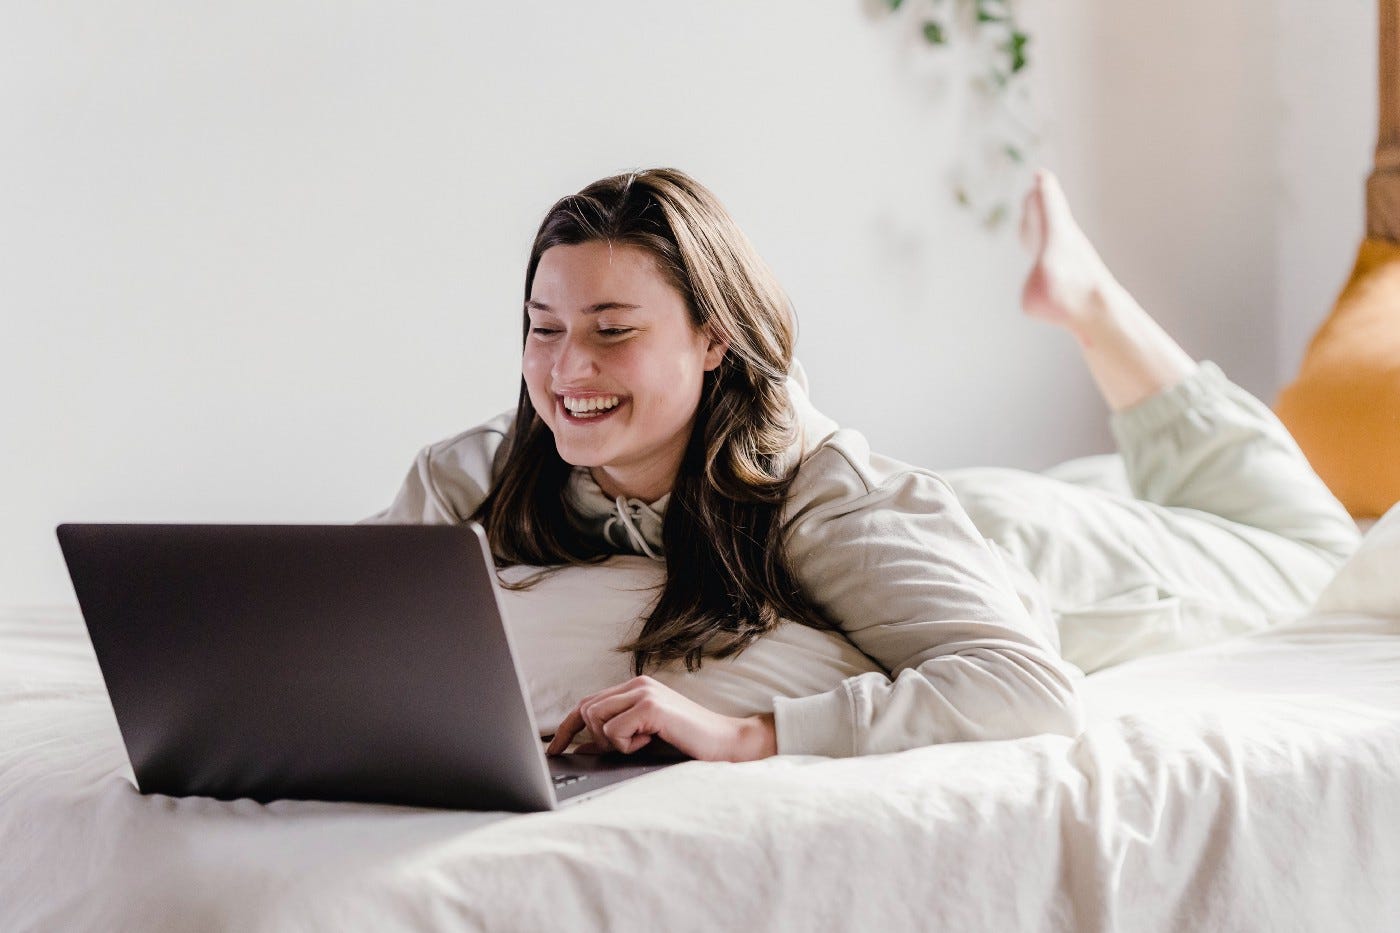 Woman laying on a bed, working on her laptop. She has one foot in the air. She is smiling. Bed and background are white and she is wearing white. Very minimalistic photograph.